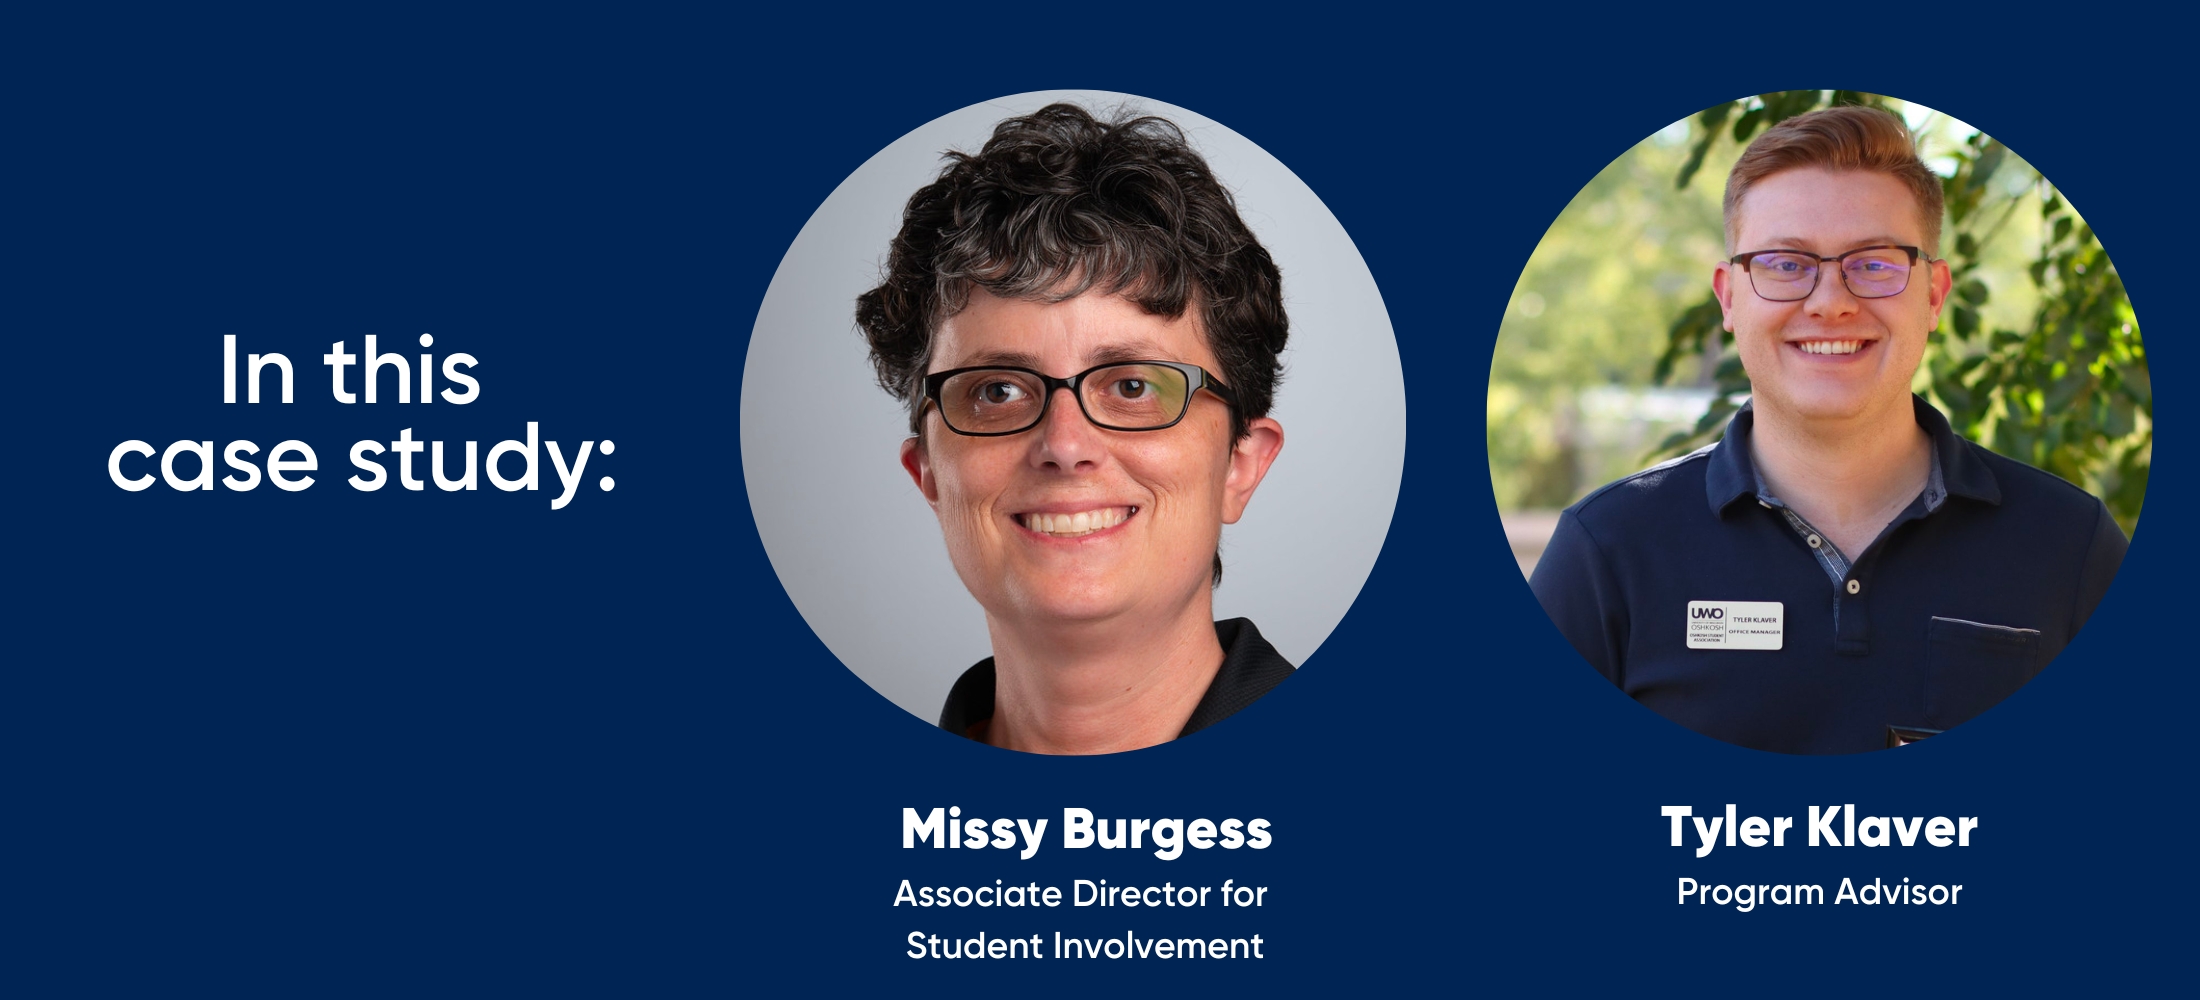 in this case study: Missy Burgess, Associate Director for Student Involvement and Tyler Klaver, Program Advisor 